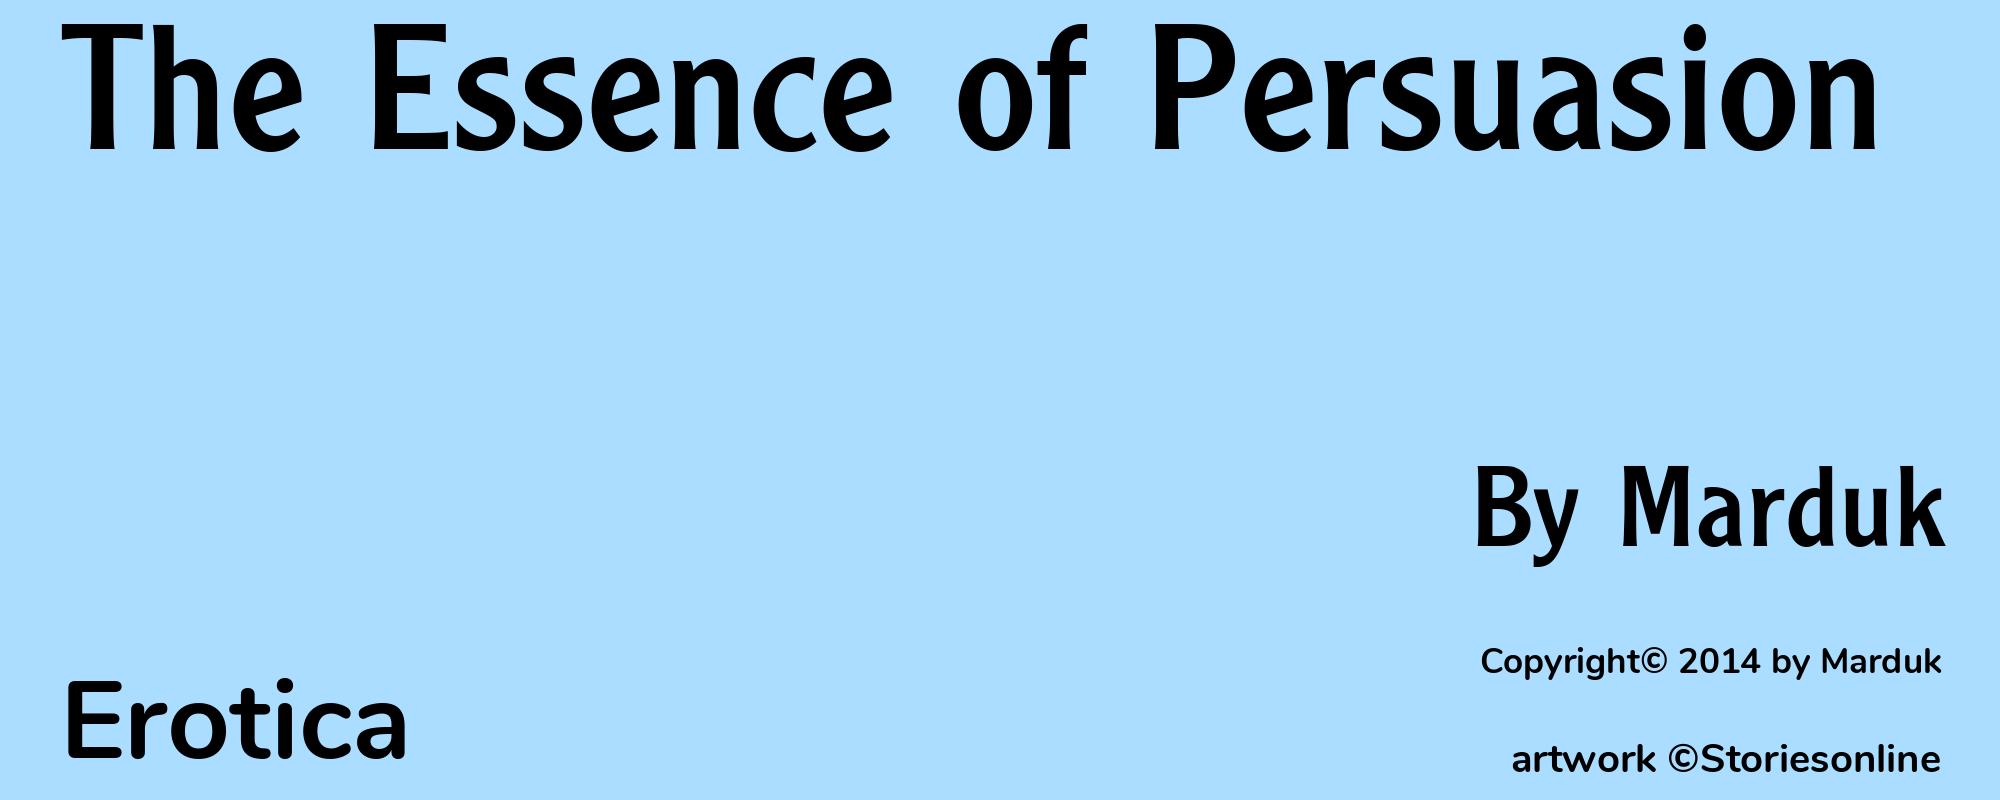 The Essence of Persuasion - Cover